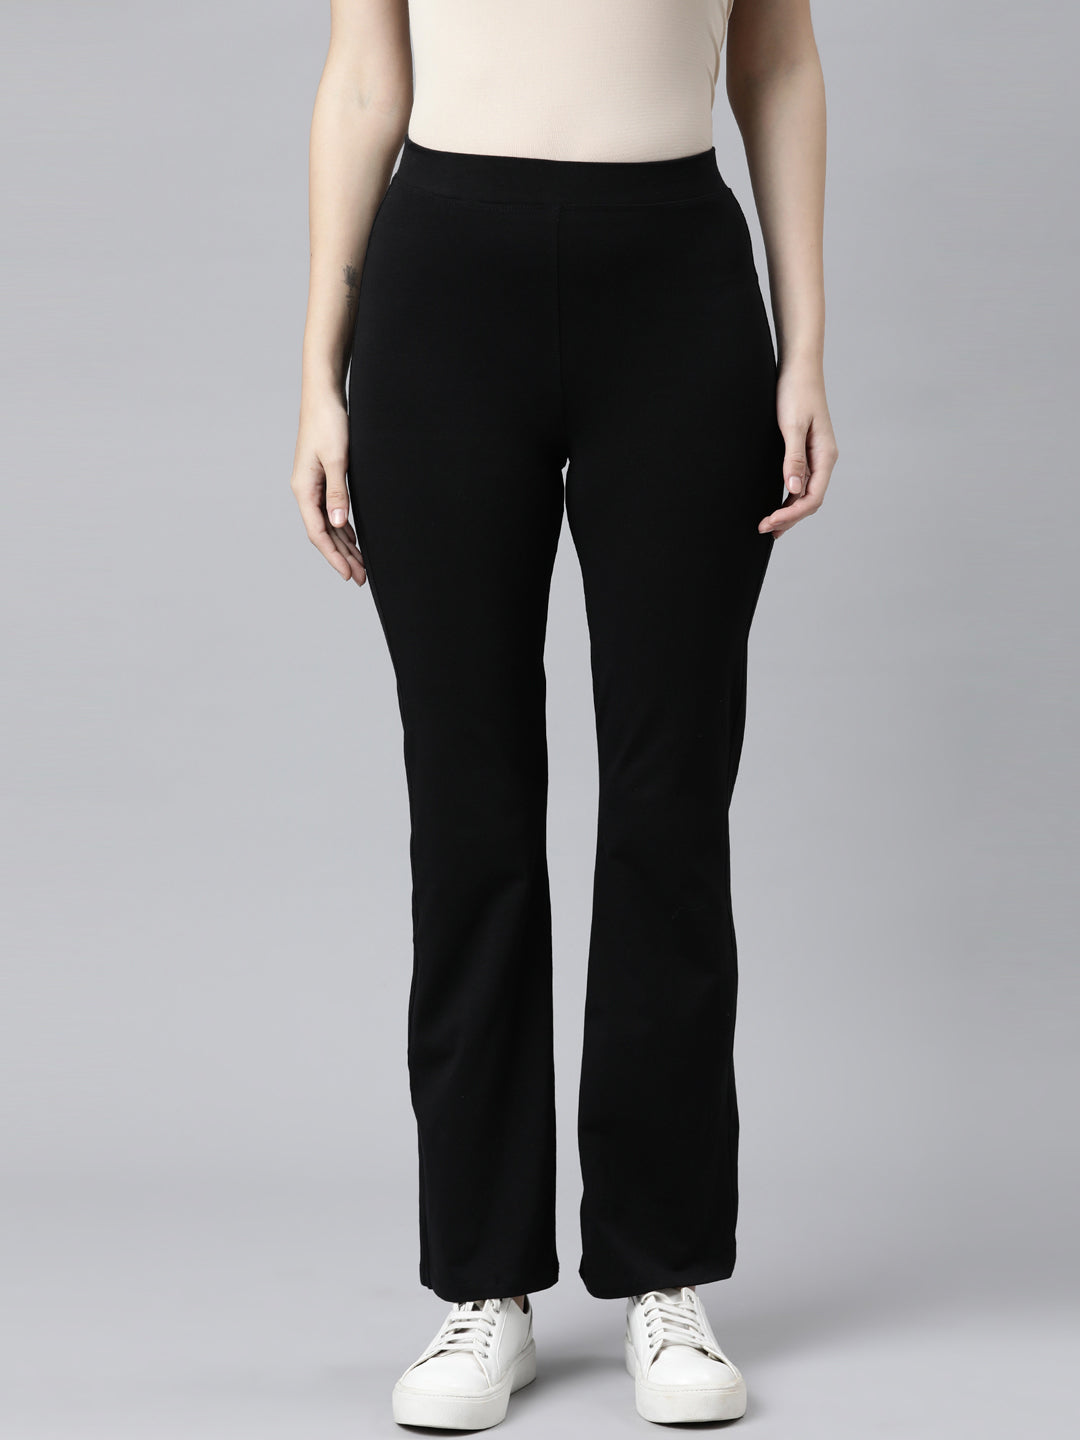 Find High-Rise Flare Pants for Women Online